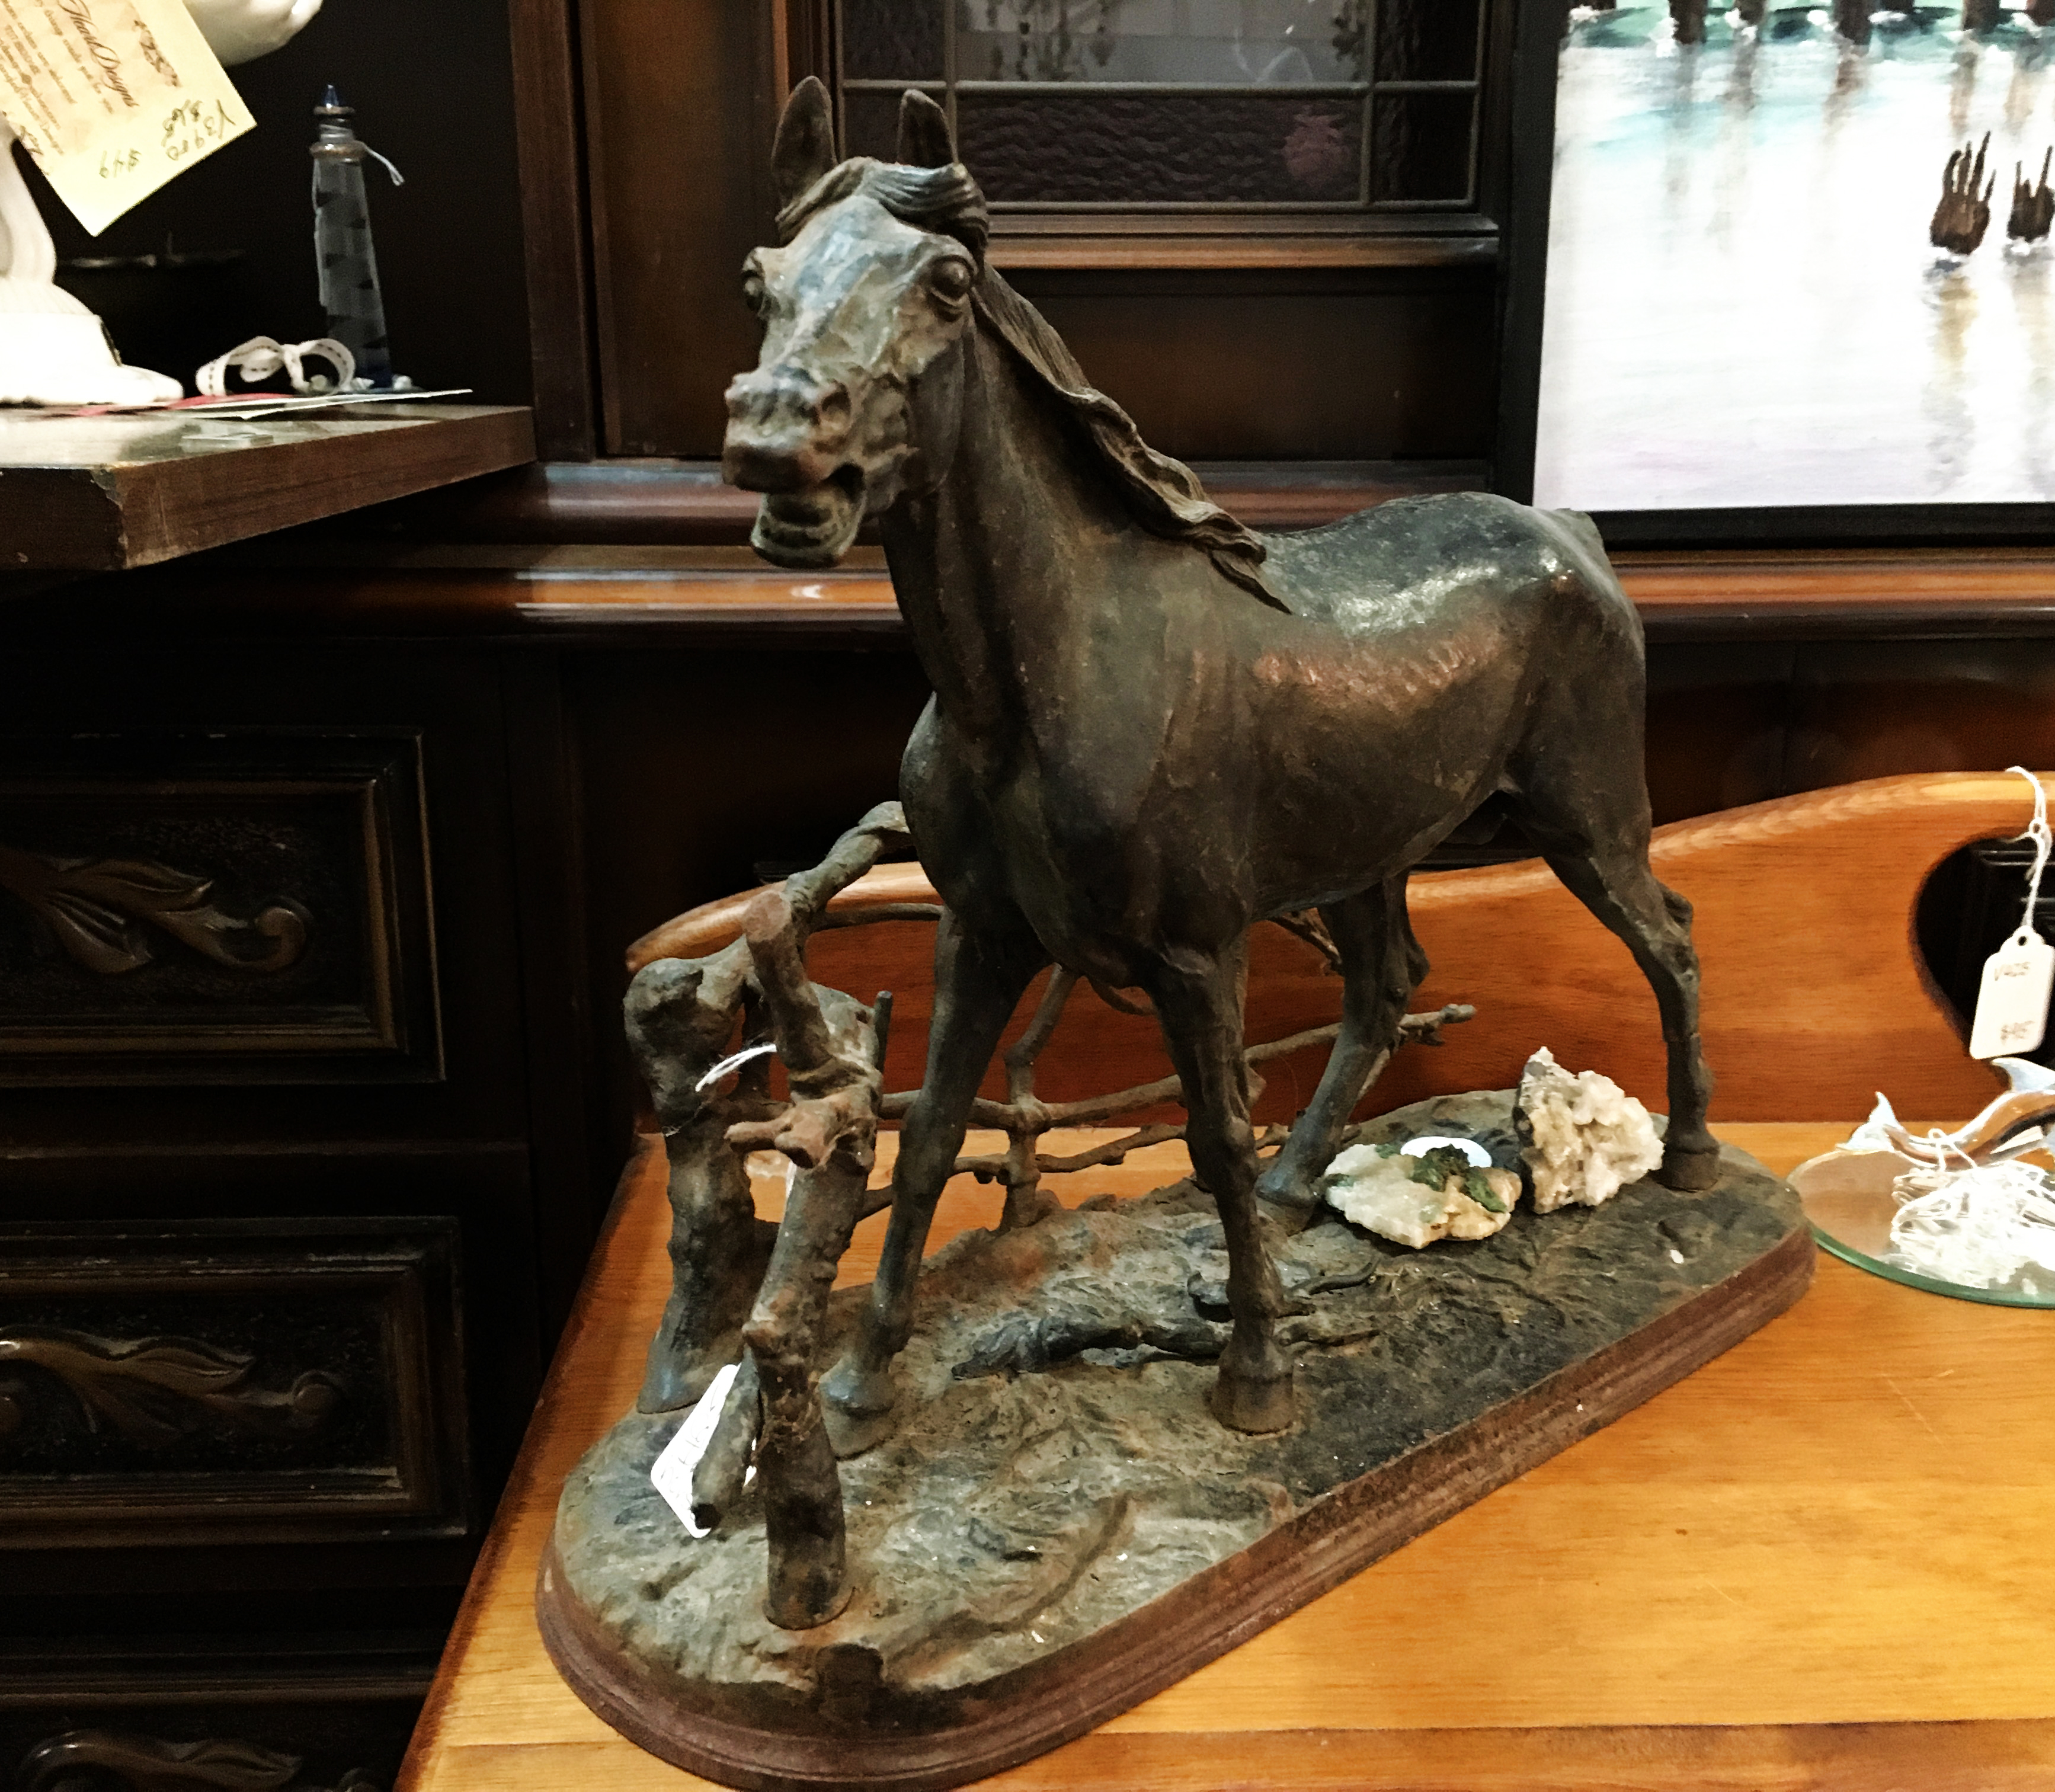 Coppersmith Antiques & Auction Company